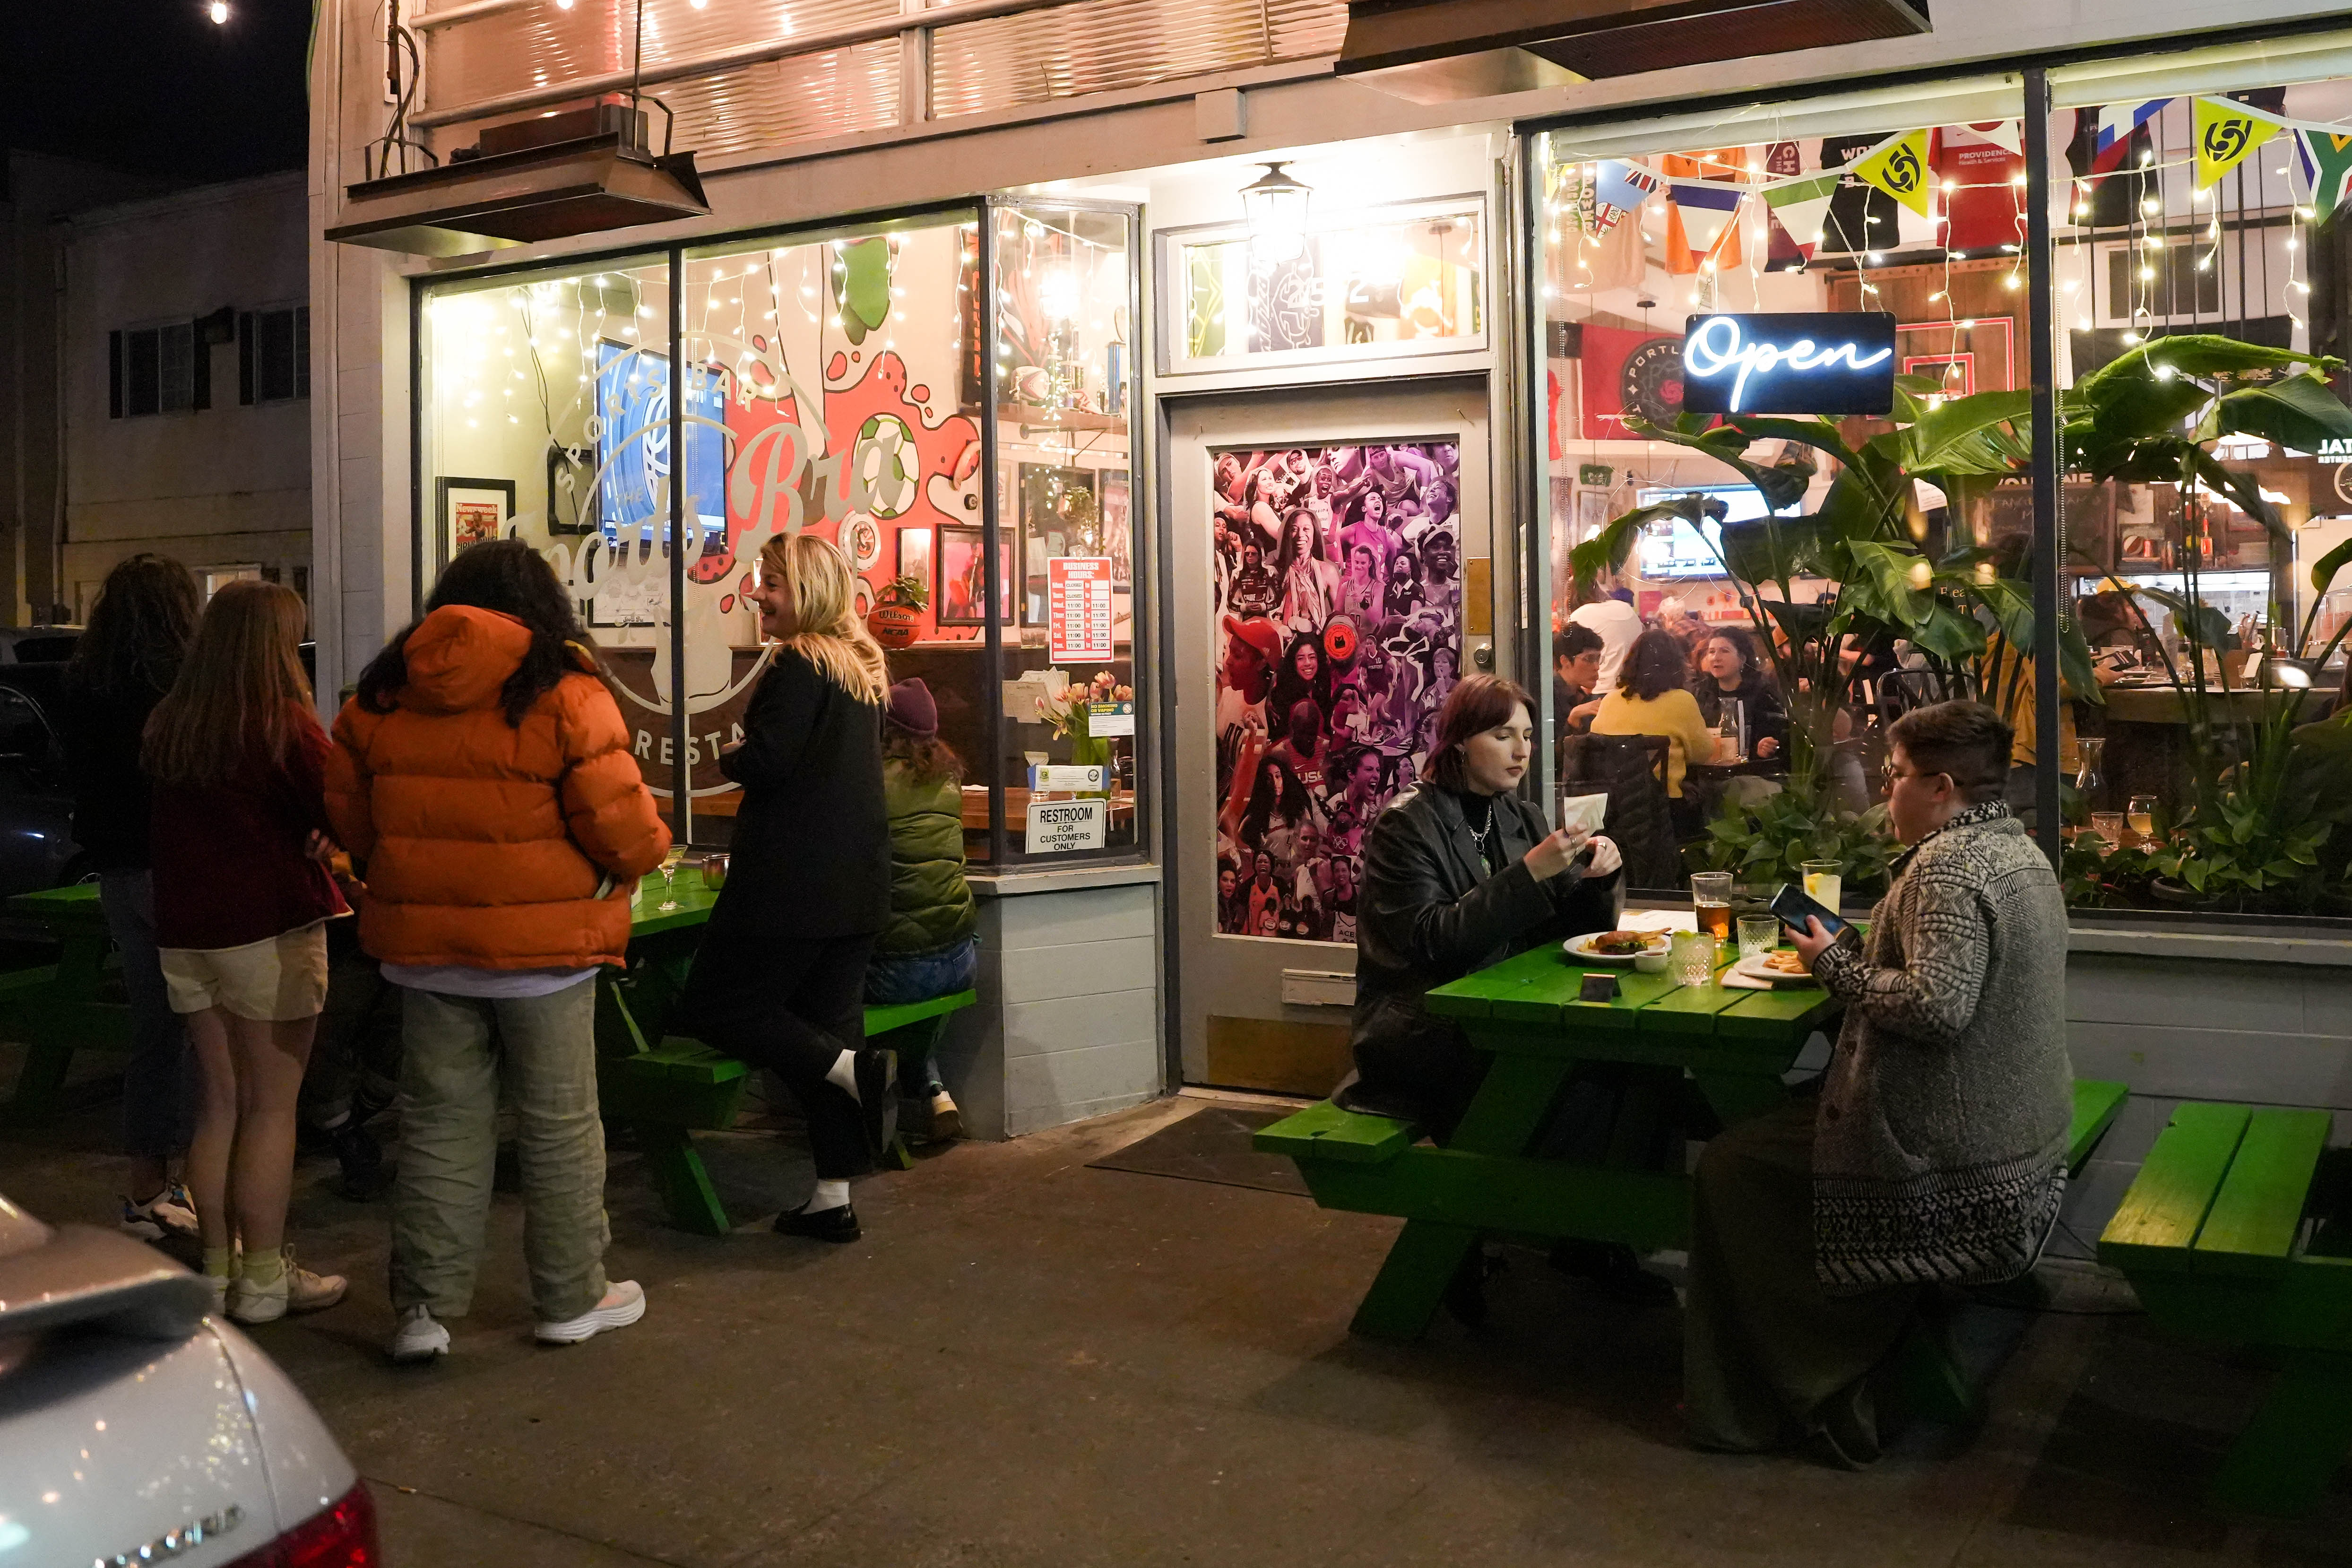 People stand outside restaurant with green picnic tables at night